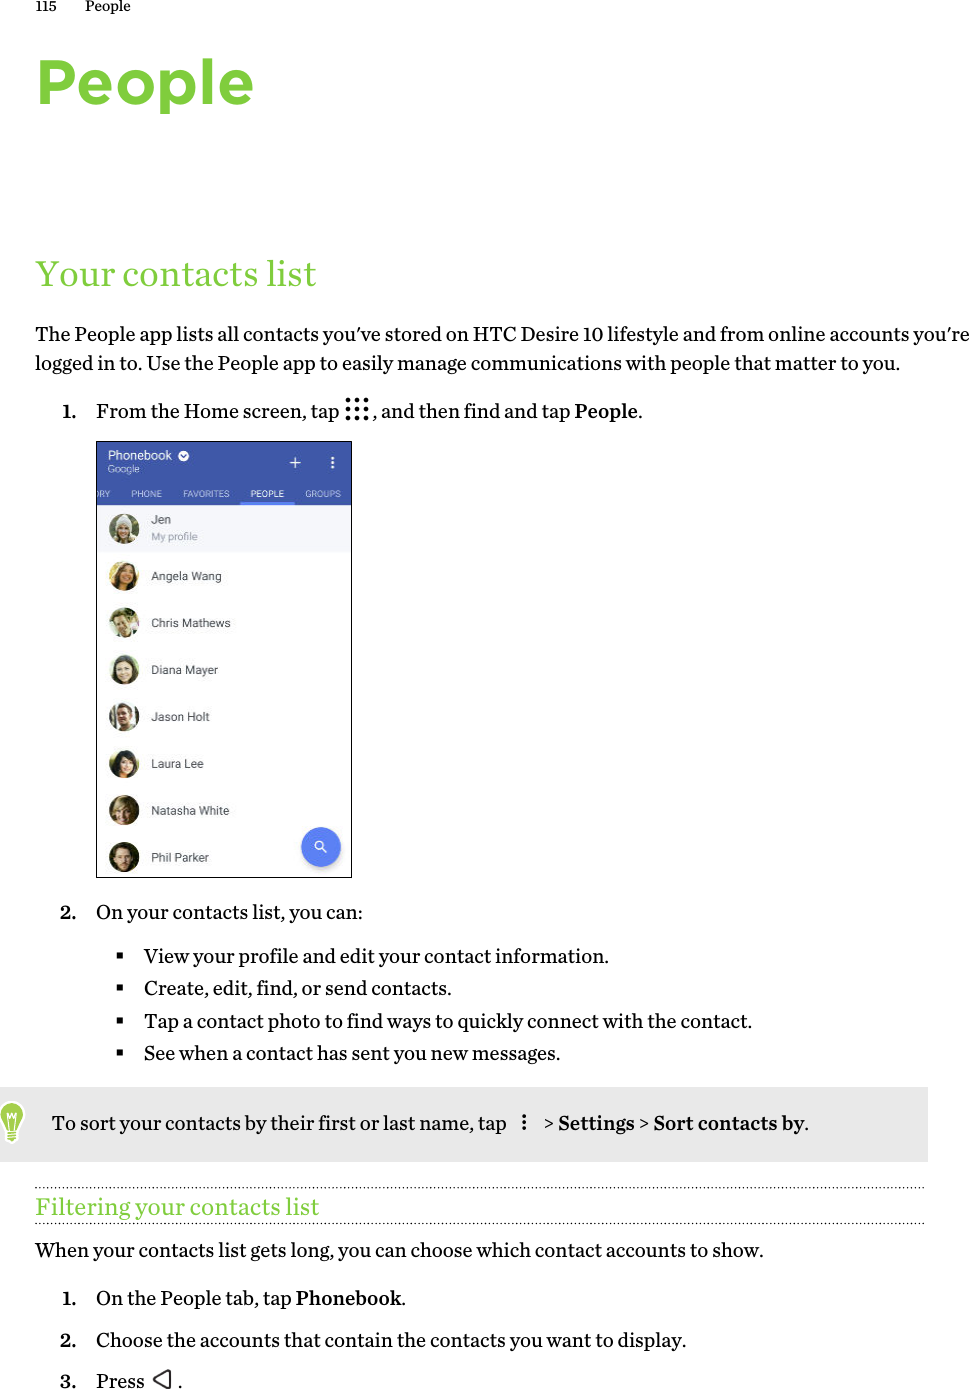 PeopleYour contacts listThe People app lists all contacts you&apos;ve stored on HTC Desire 10 lifestyle and from online accounts you&apos;re logged in to. Use the People app to easily manage communications with people that matter to you.1. From the Home screen, tap  , and then find and tap People. 2. On your contacts list, you can:§View your profile and edit your contact information.§Create, edit, find, or send contacts.§Tap a contact photo to find ways to quickly connect with the contact.§See when a contact has sent you new messages.To sort your contacts by their first or last name, tap   &gt; Settings &gt; Sort contacts by.Filtering your contacts listWhen your contacts list gets long, you can choose which contact accounts to show. 1. On the People tab, tap Phonebook.2. Choose the accounts that contain the contacts you want to display.3. Press  .115 People